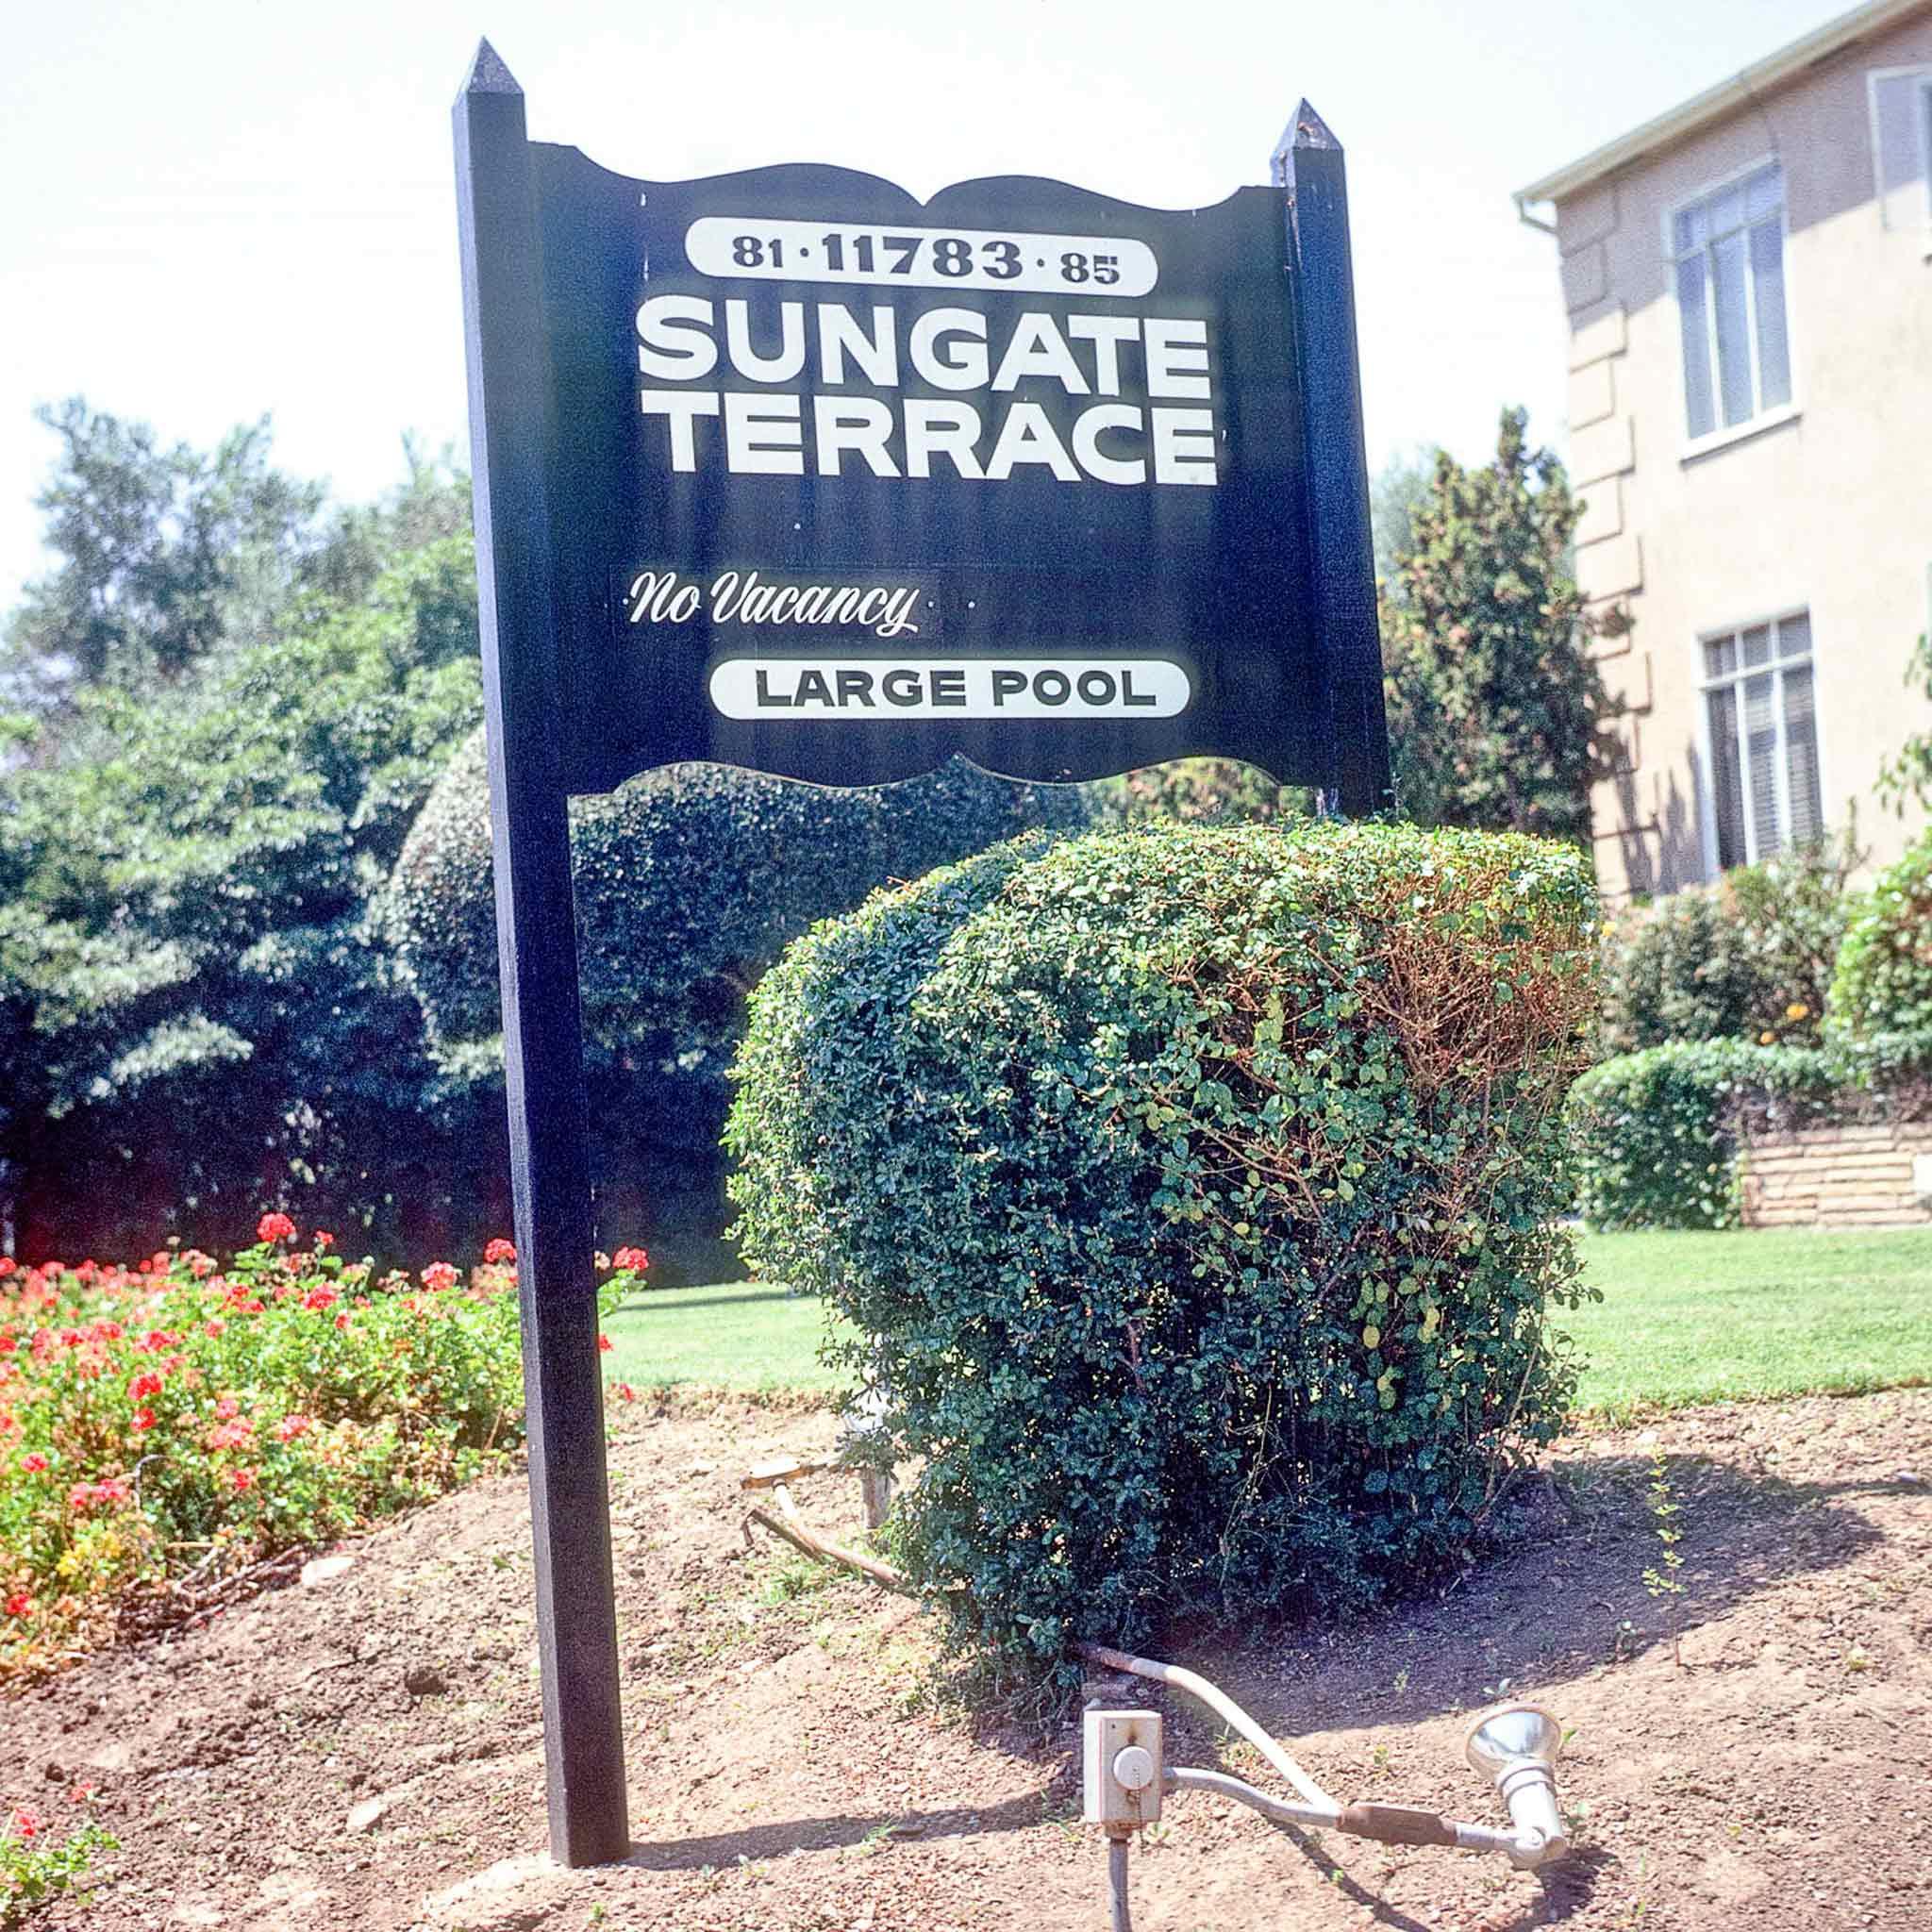 A wood sign that says "Sungate Terrace"